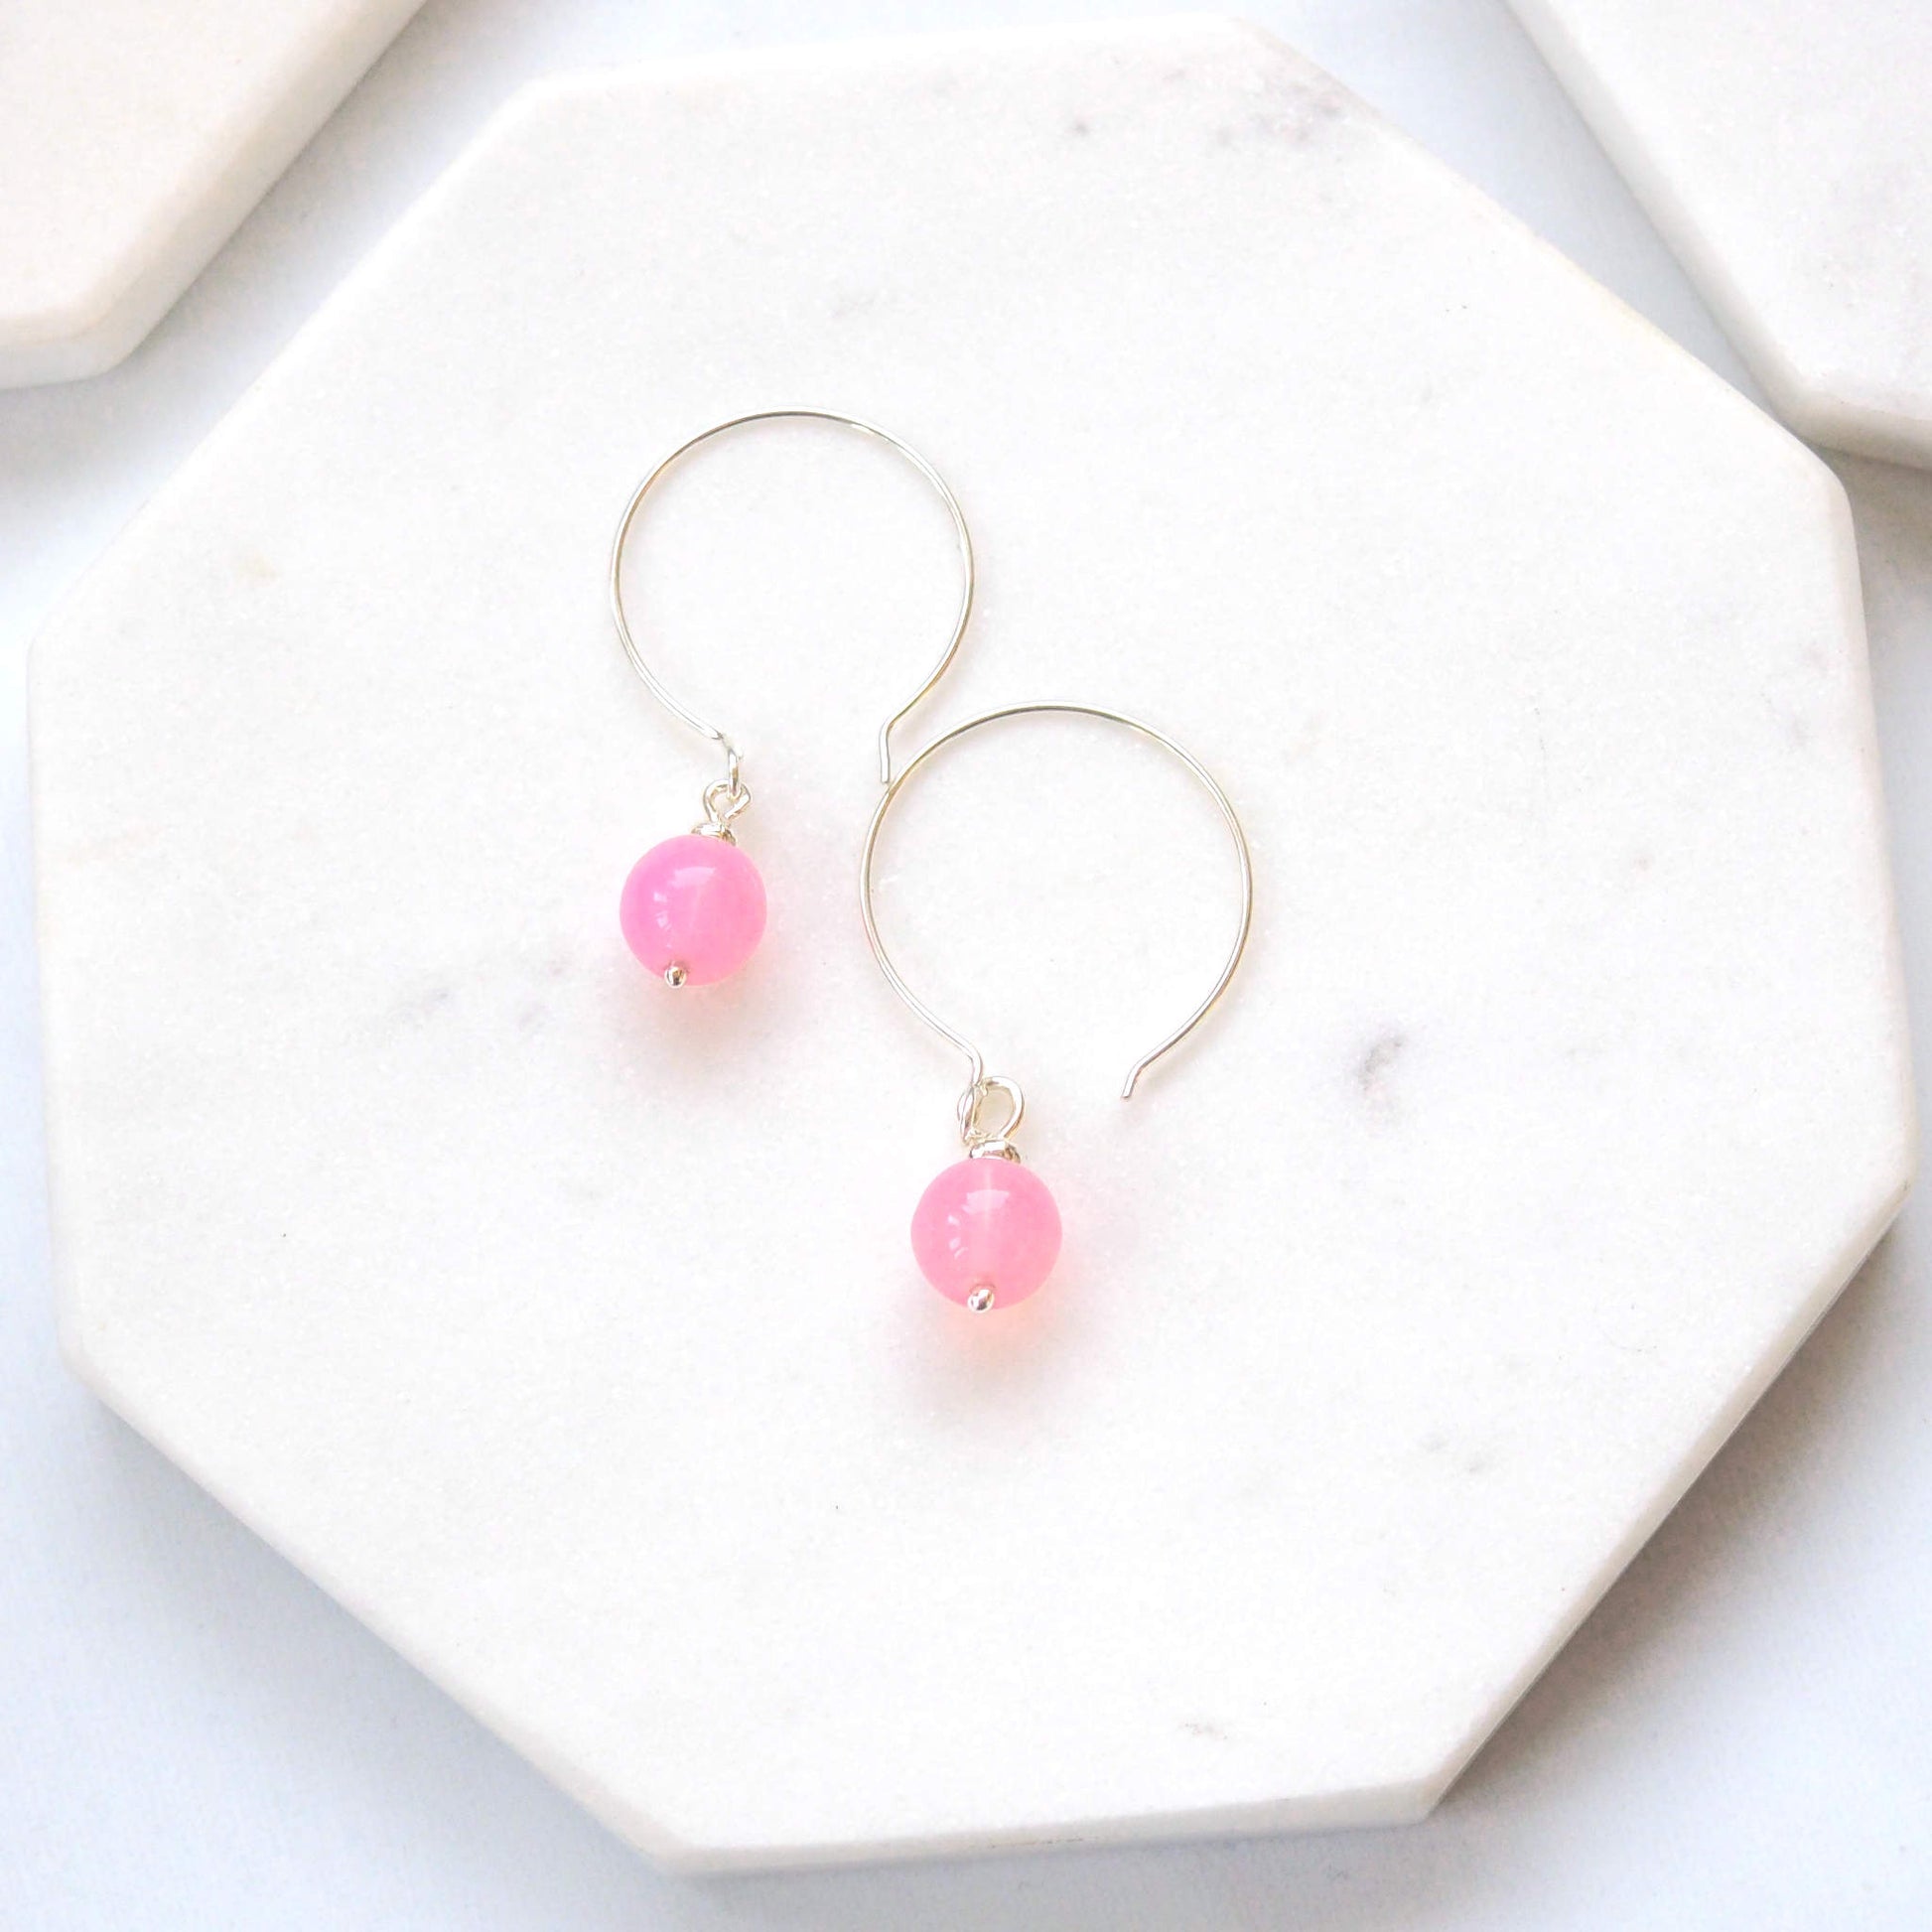 Pale Pink Silver minimalist handmade silver hoops. Handcrafted ear wires with a round glass bead dropper. Made in Scotland by maram jewellery